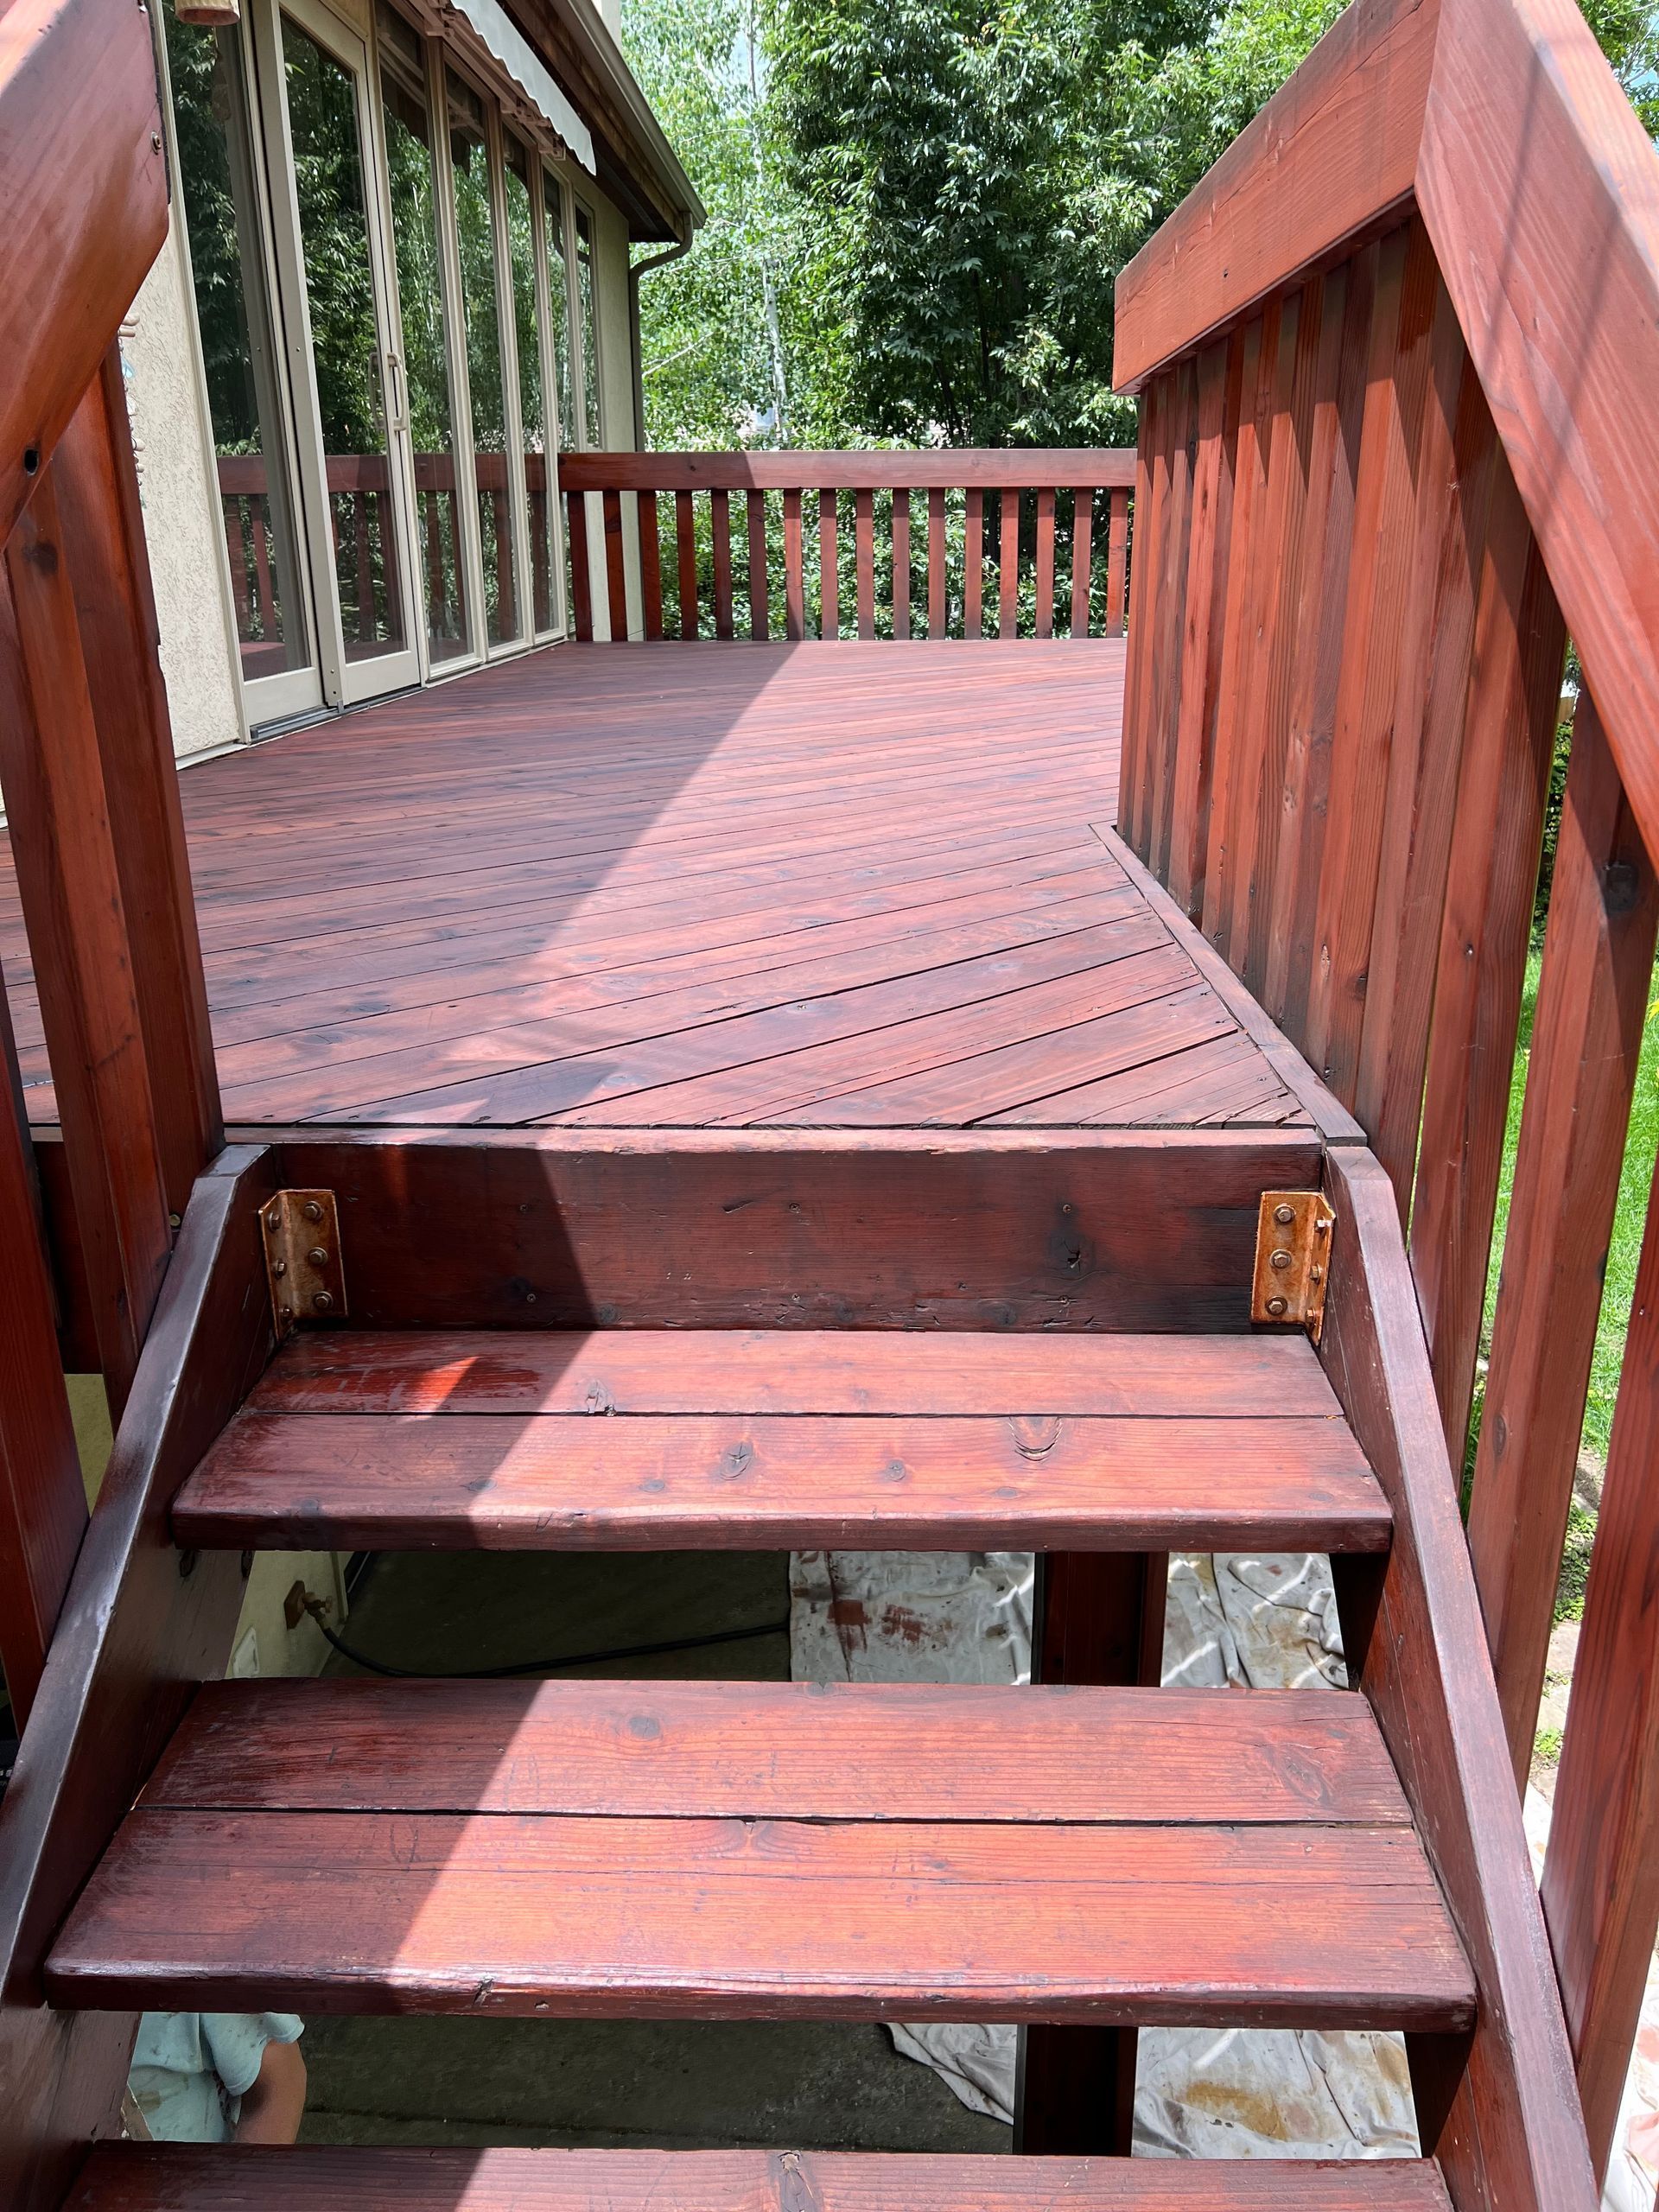 a wooden deck with stairs leading up to it